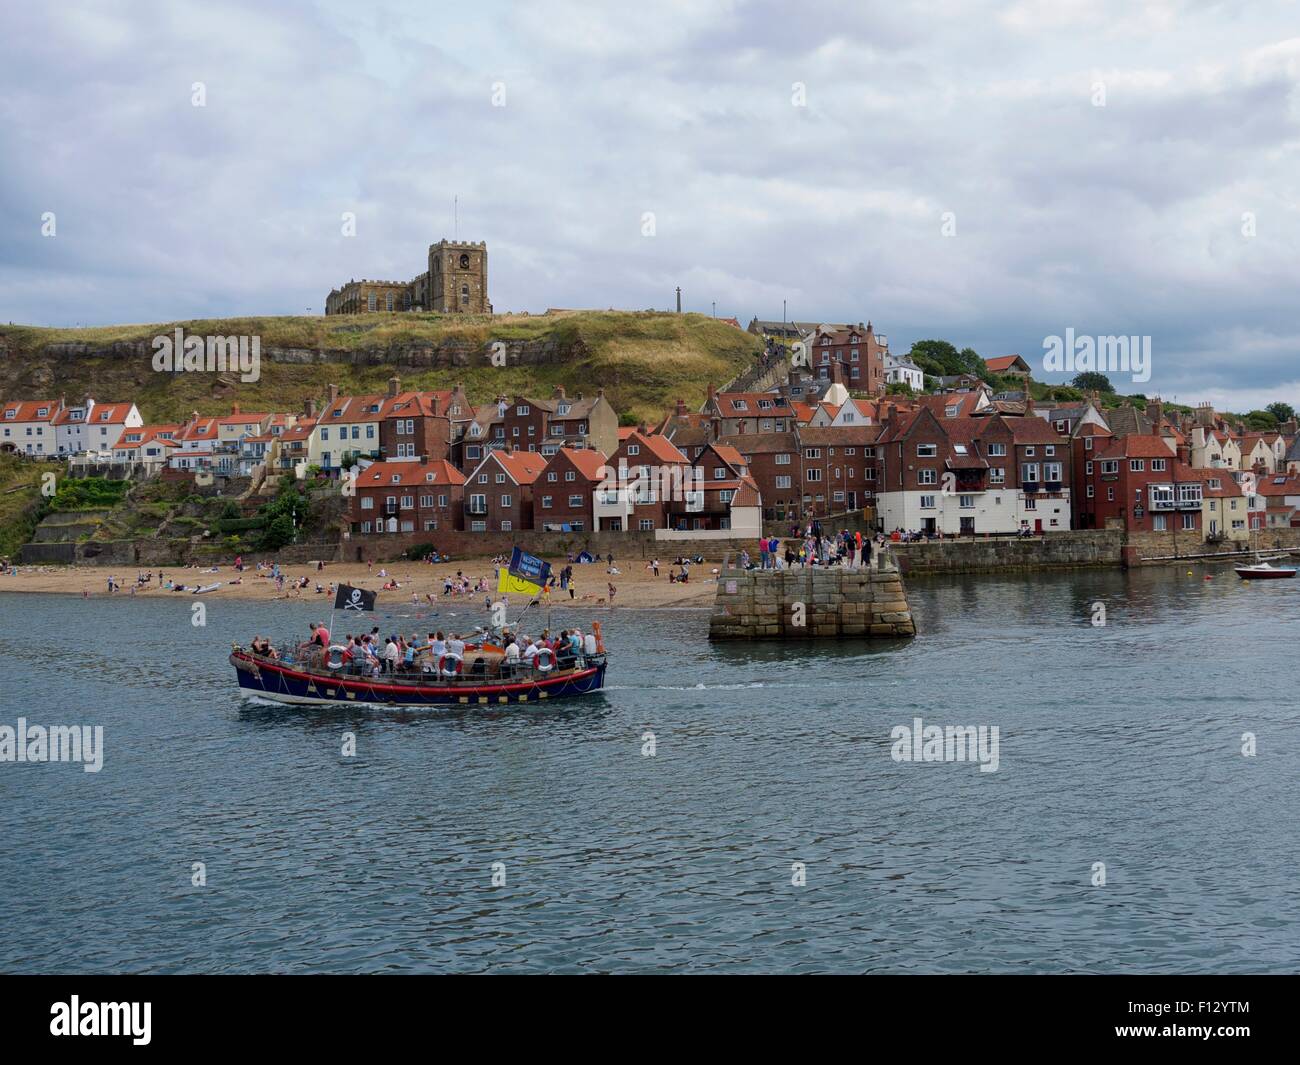 Church on a hill with a tourist boat in the foreground and a pier and village in the background Stock Photo